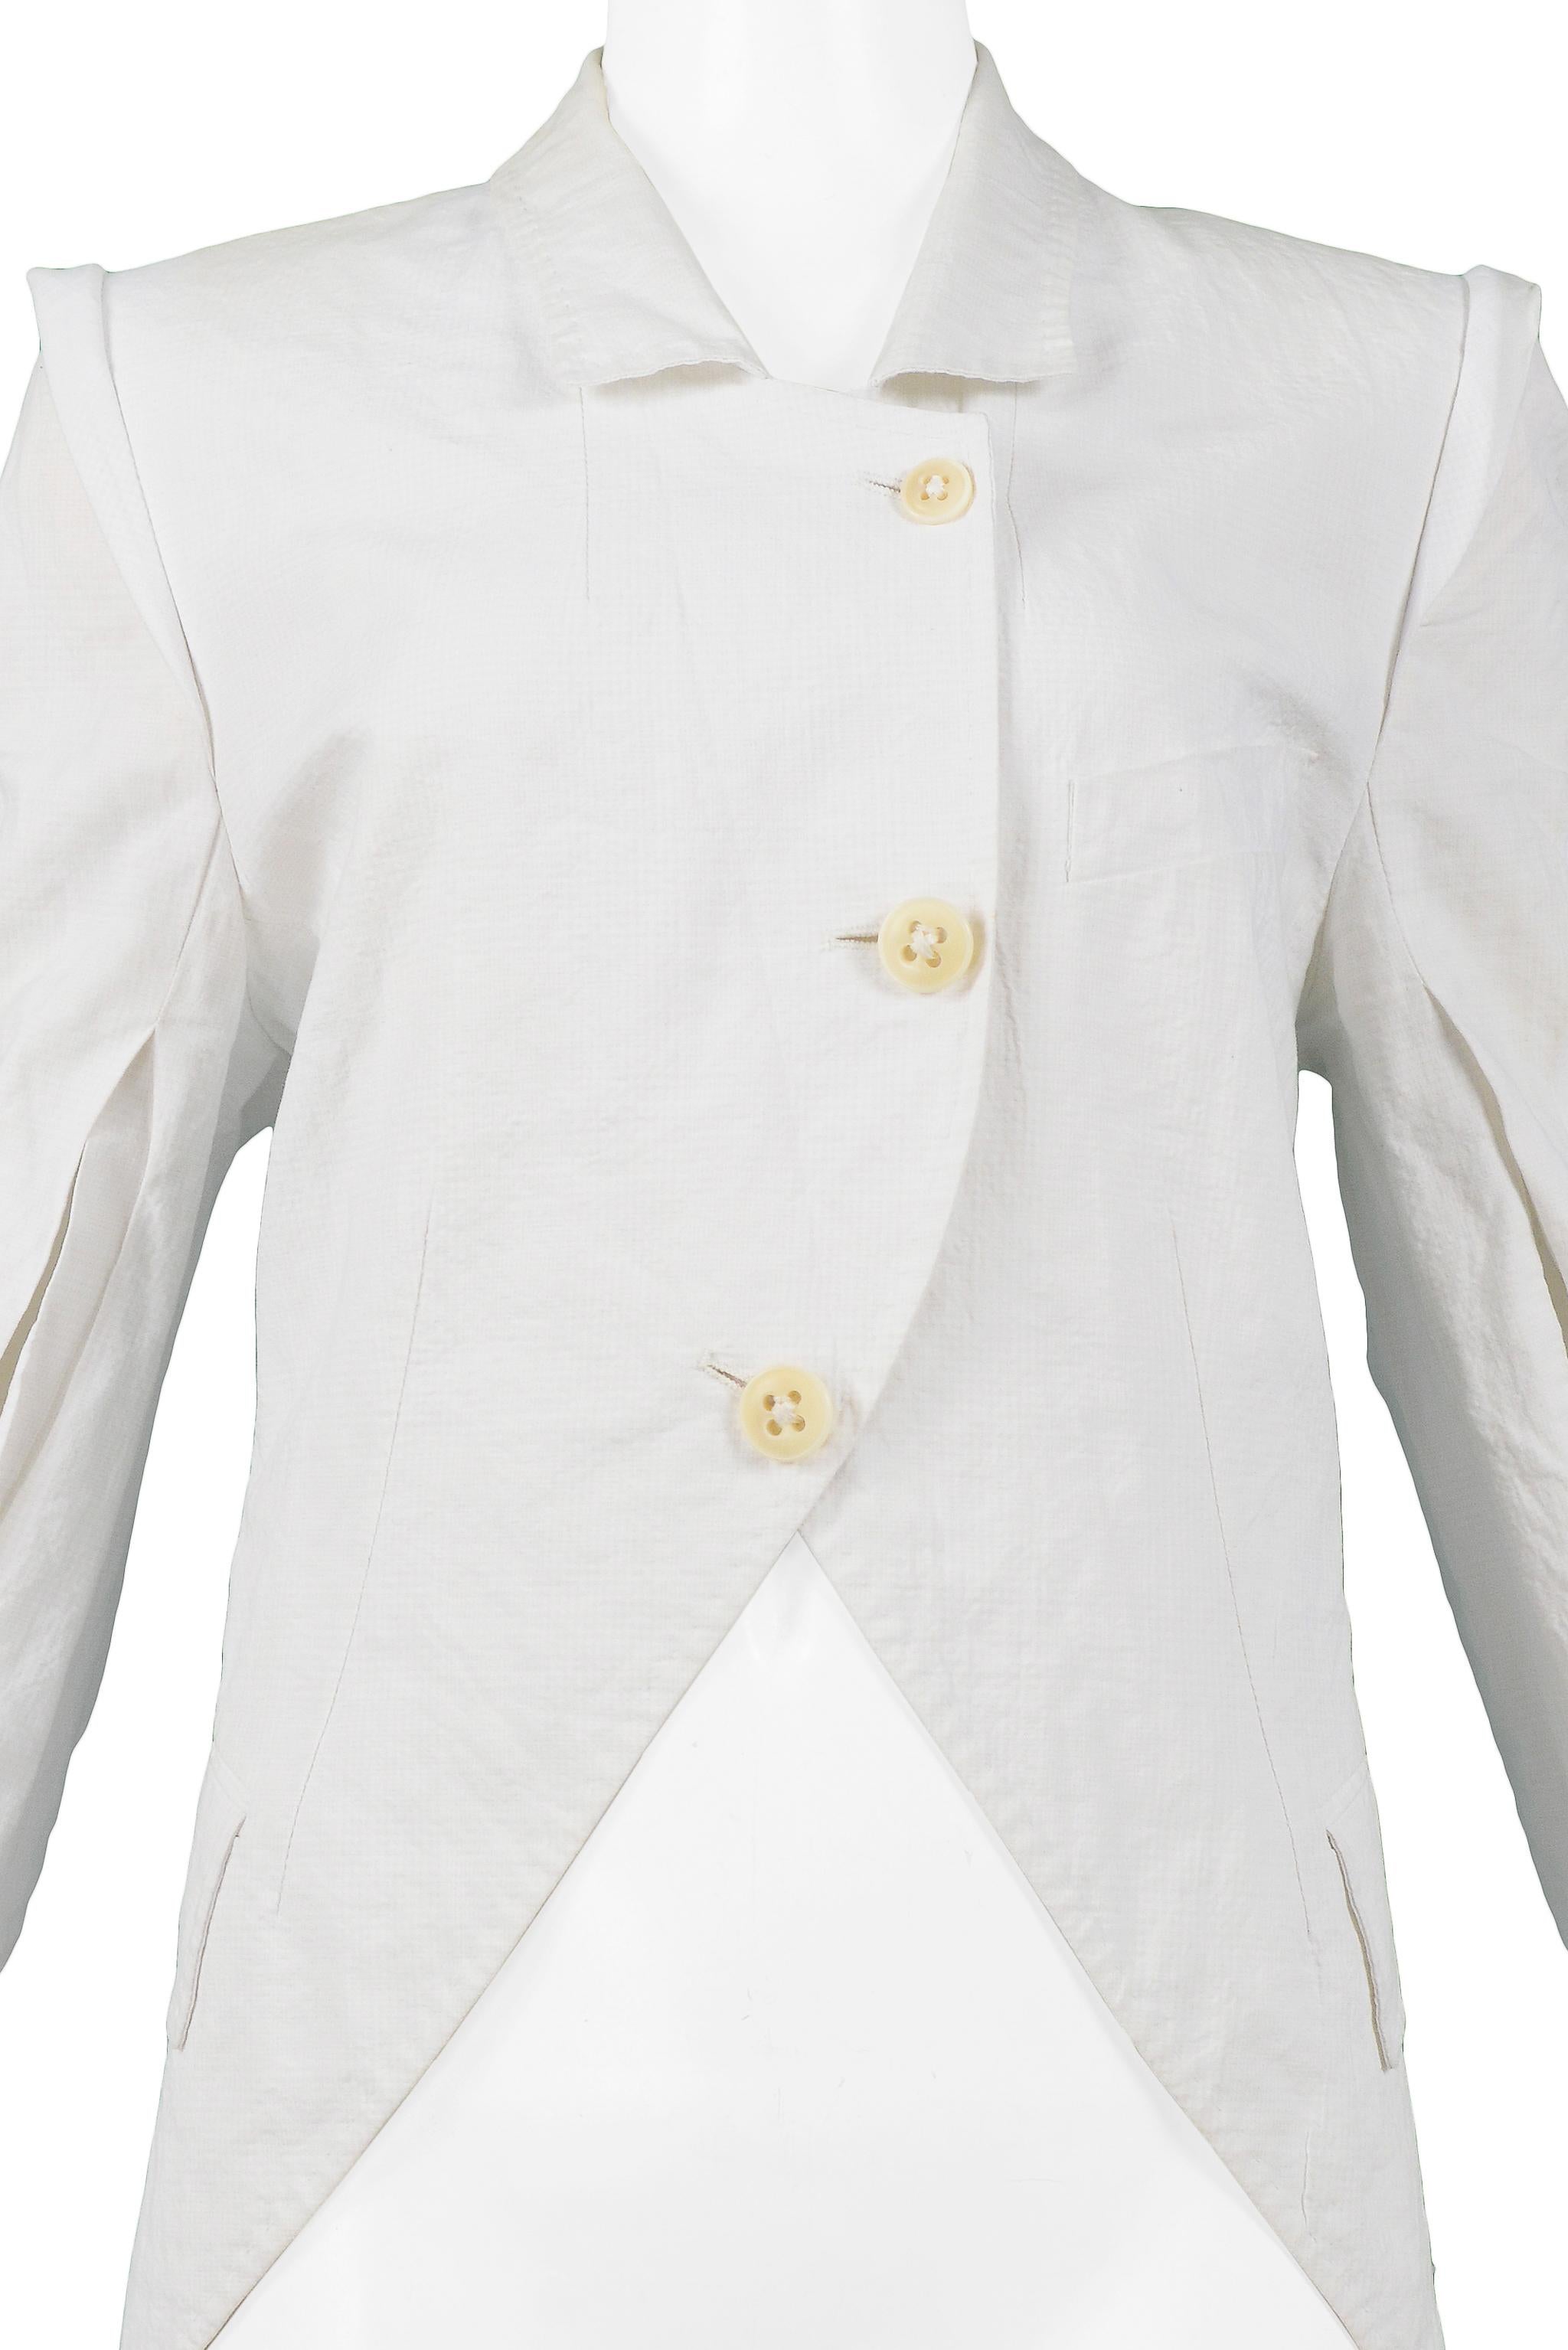 Ann Demeulemeester White Cotton Slit Sleeve Jacket In Excellent Condition For Sale In Los Angeles, CA